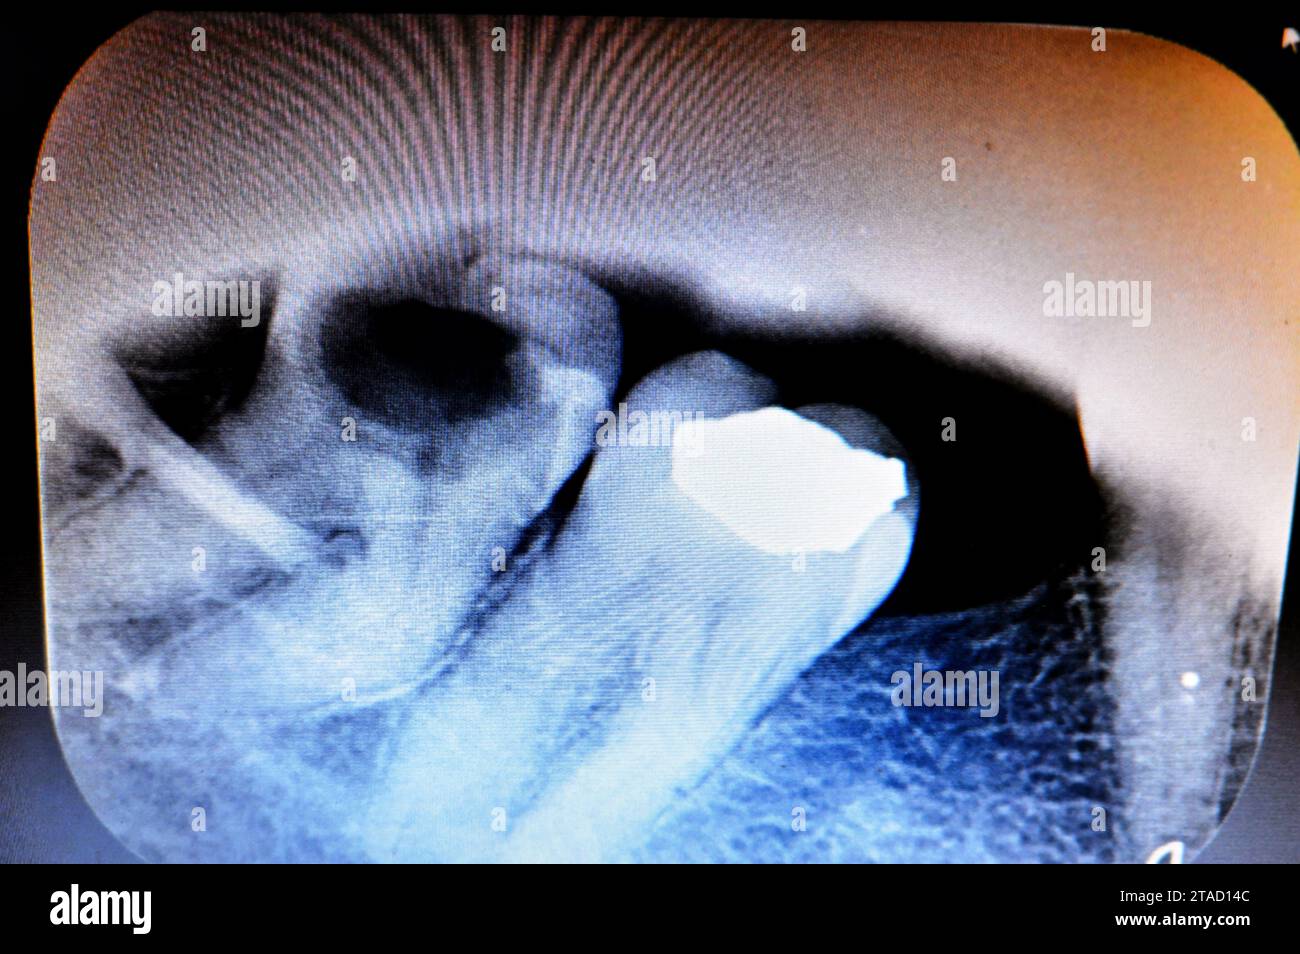 X ray on wisdom 8th lower right tooth with a teeth decay, after exposed nerve and severe pain, swelling and inflammation, Wisdom teeth are the molars Stock Photo